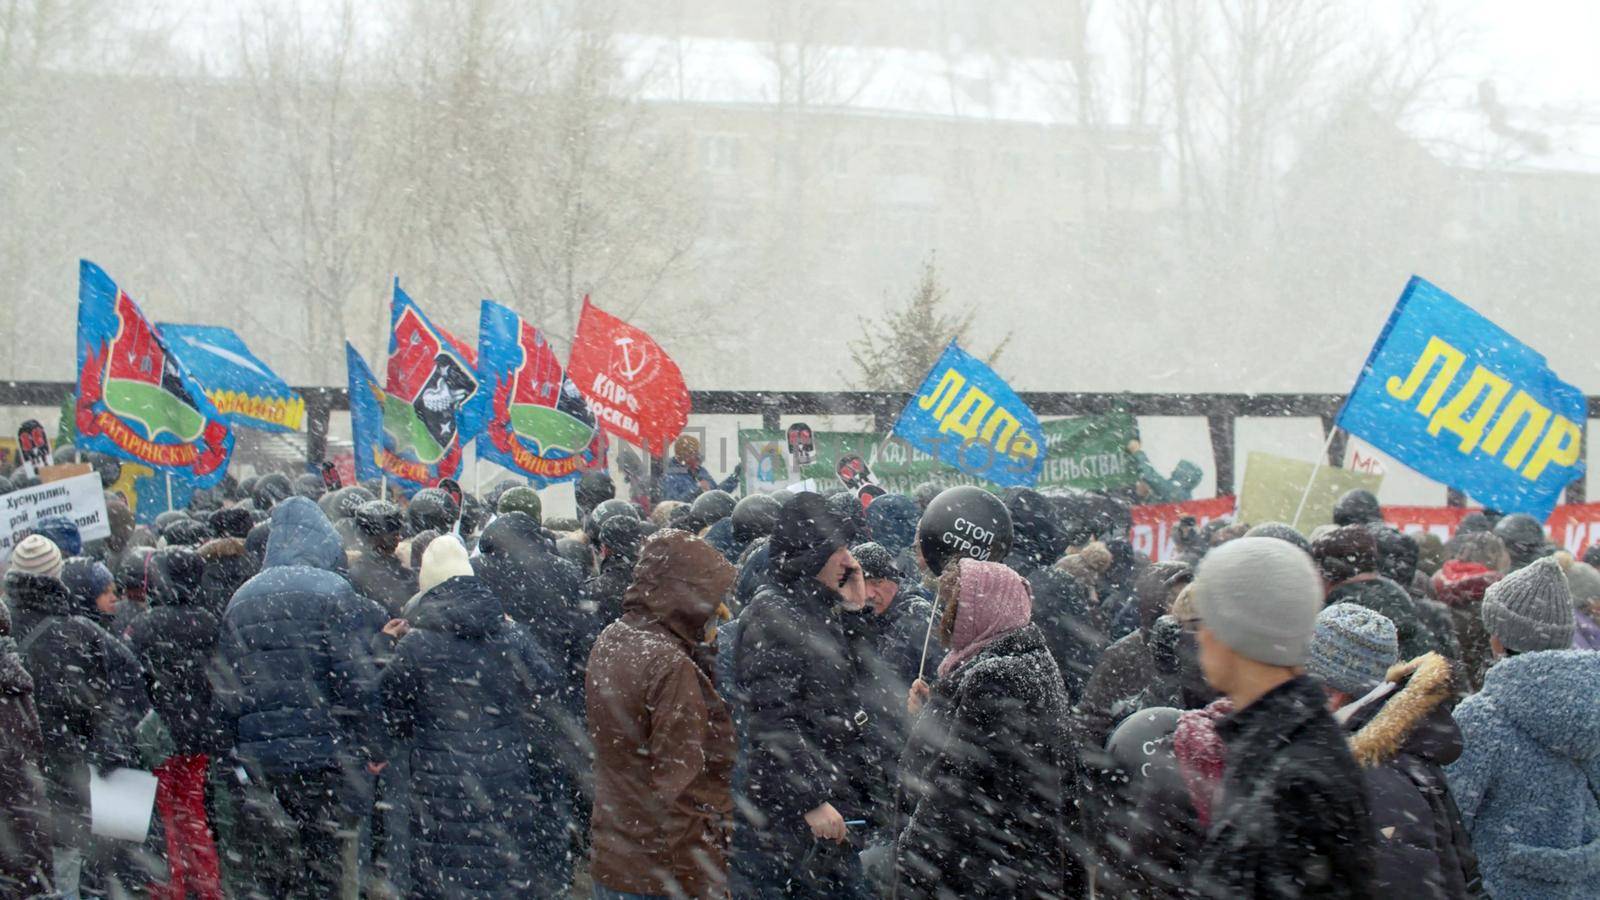 RUSSIA, MOSCOW, march 2020 - Crowd in Moscow under the snow at a protest rally against construction, for maintaining parks. Make Your Voice Heard series.